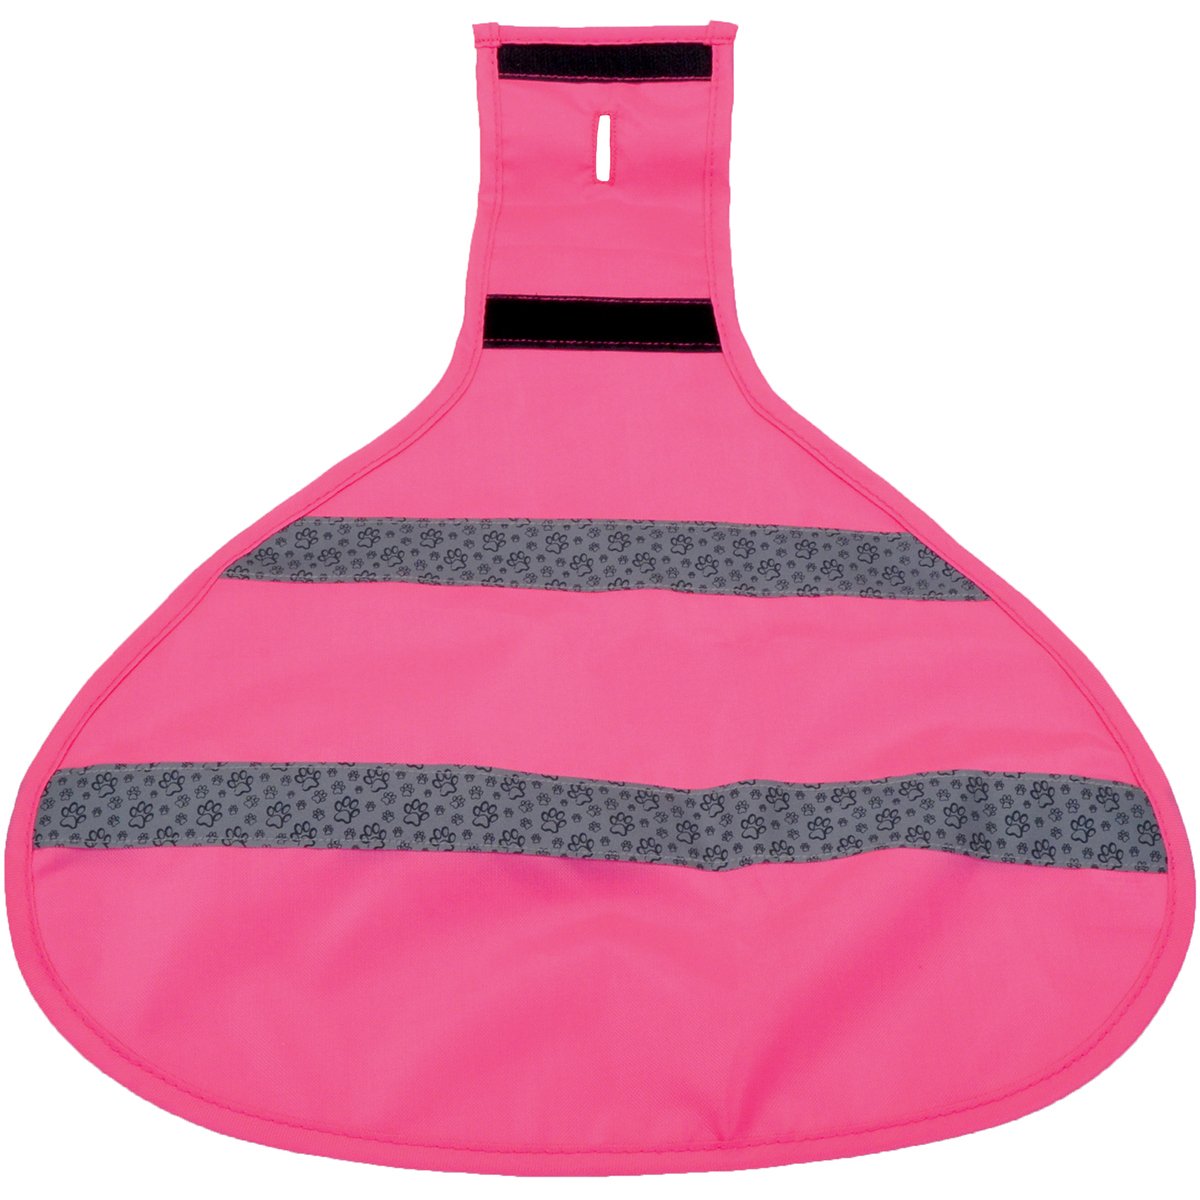 01911nps Reflective Safety Vest, Neon Pink - Small